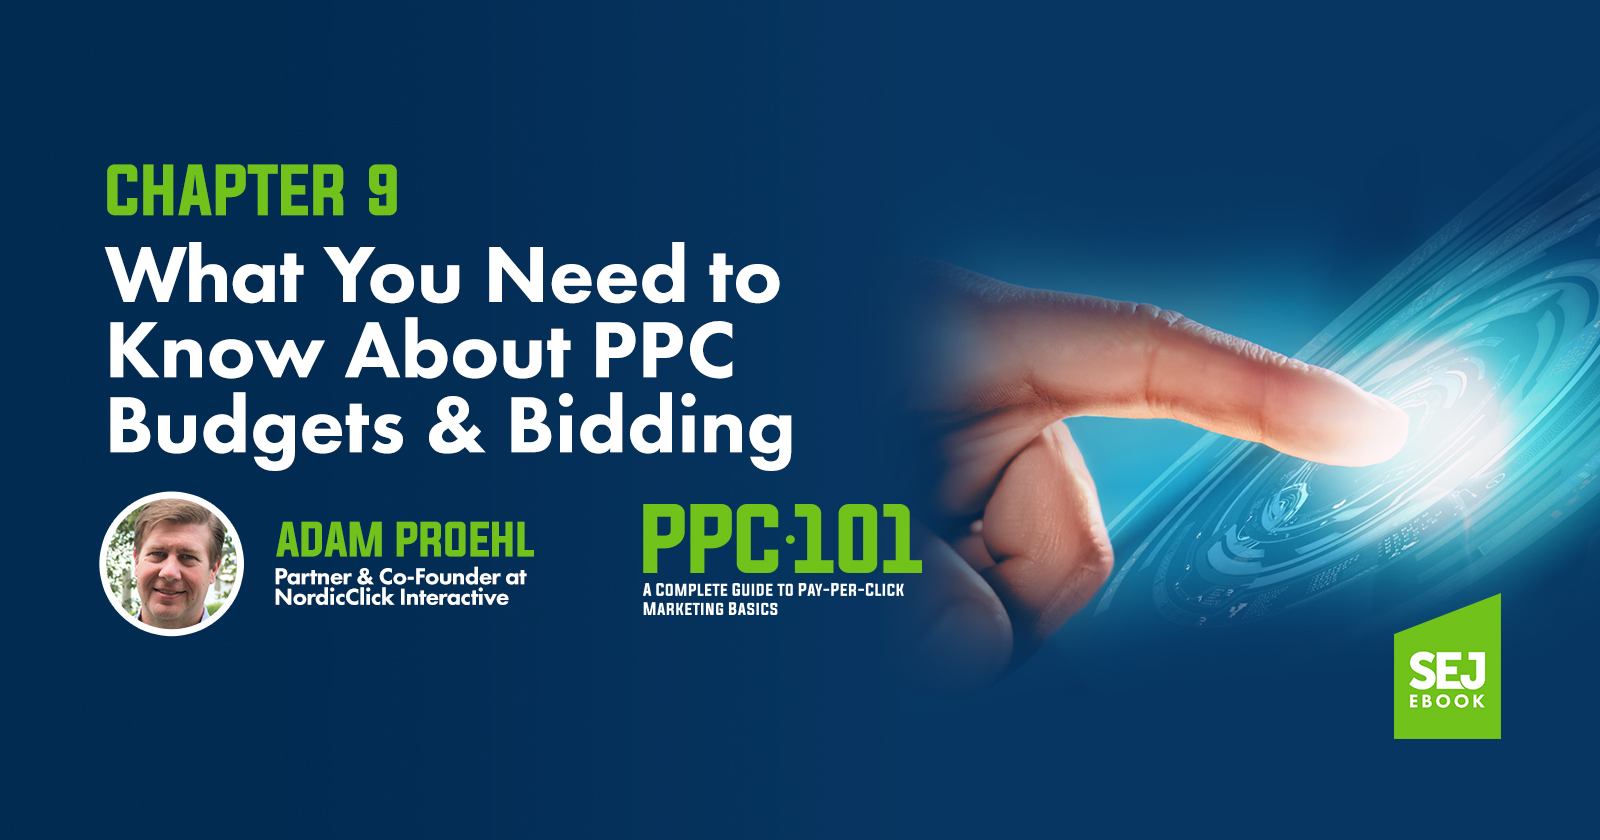 PPC 101 Guide Chapter 9 - What You Need to Know About PPC Budgets & Bidding